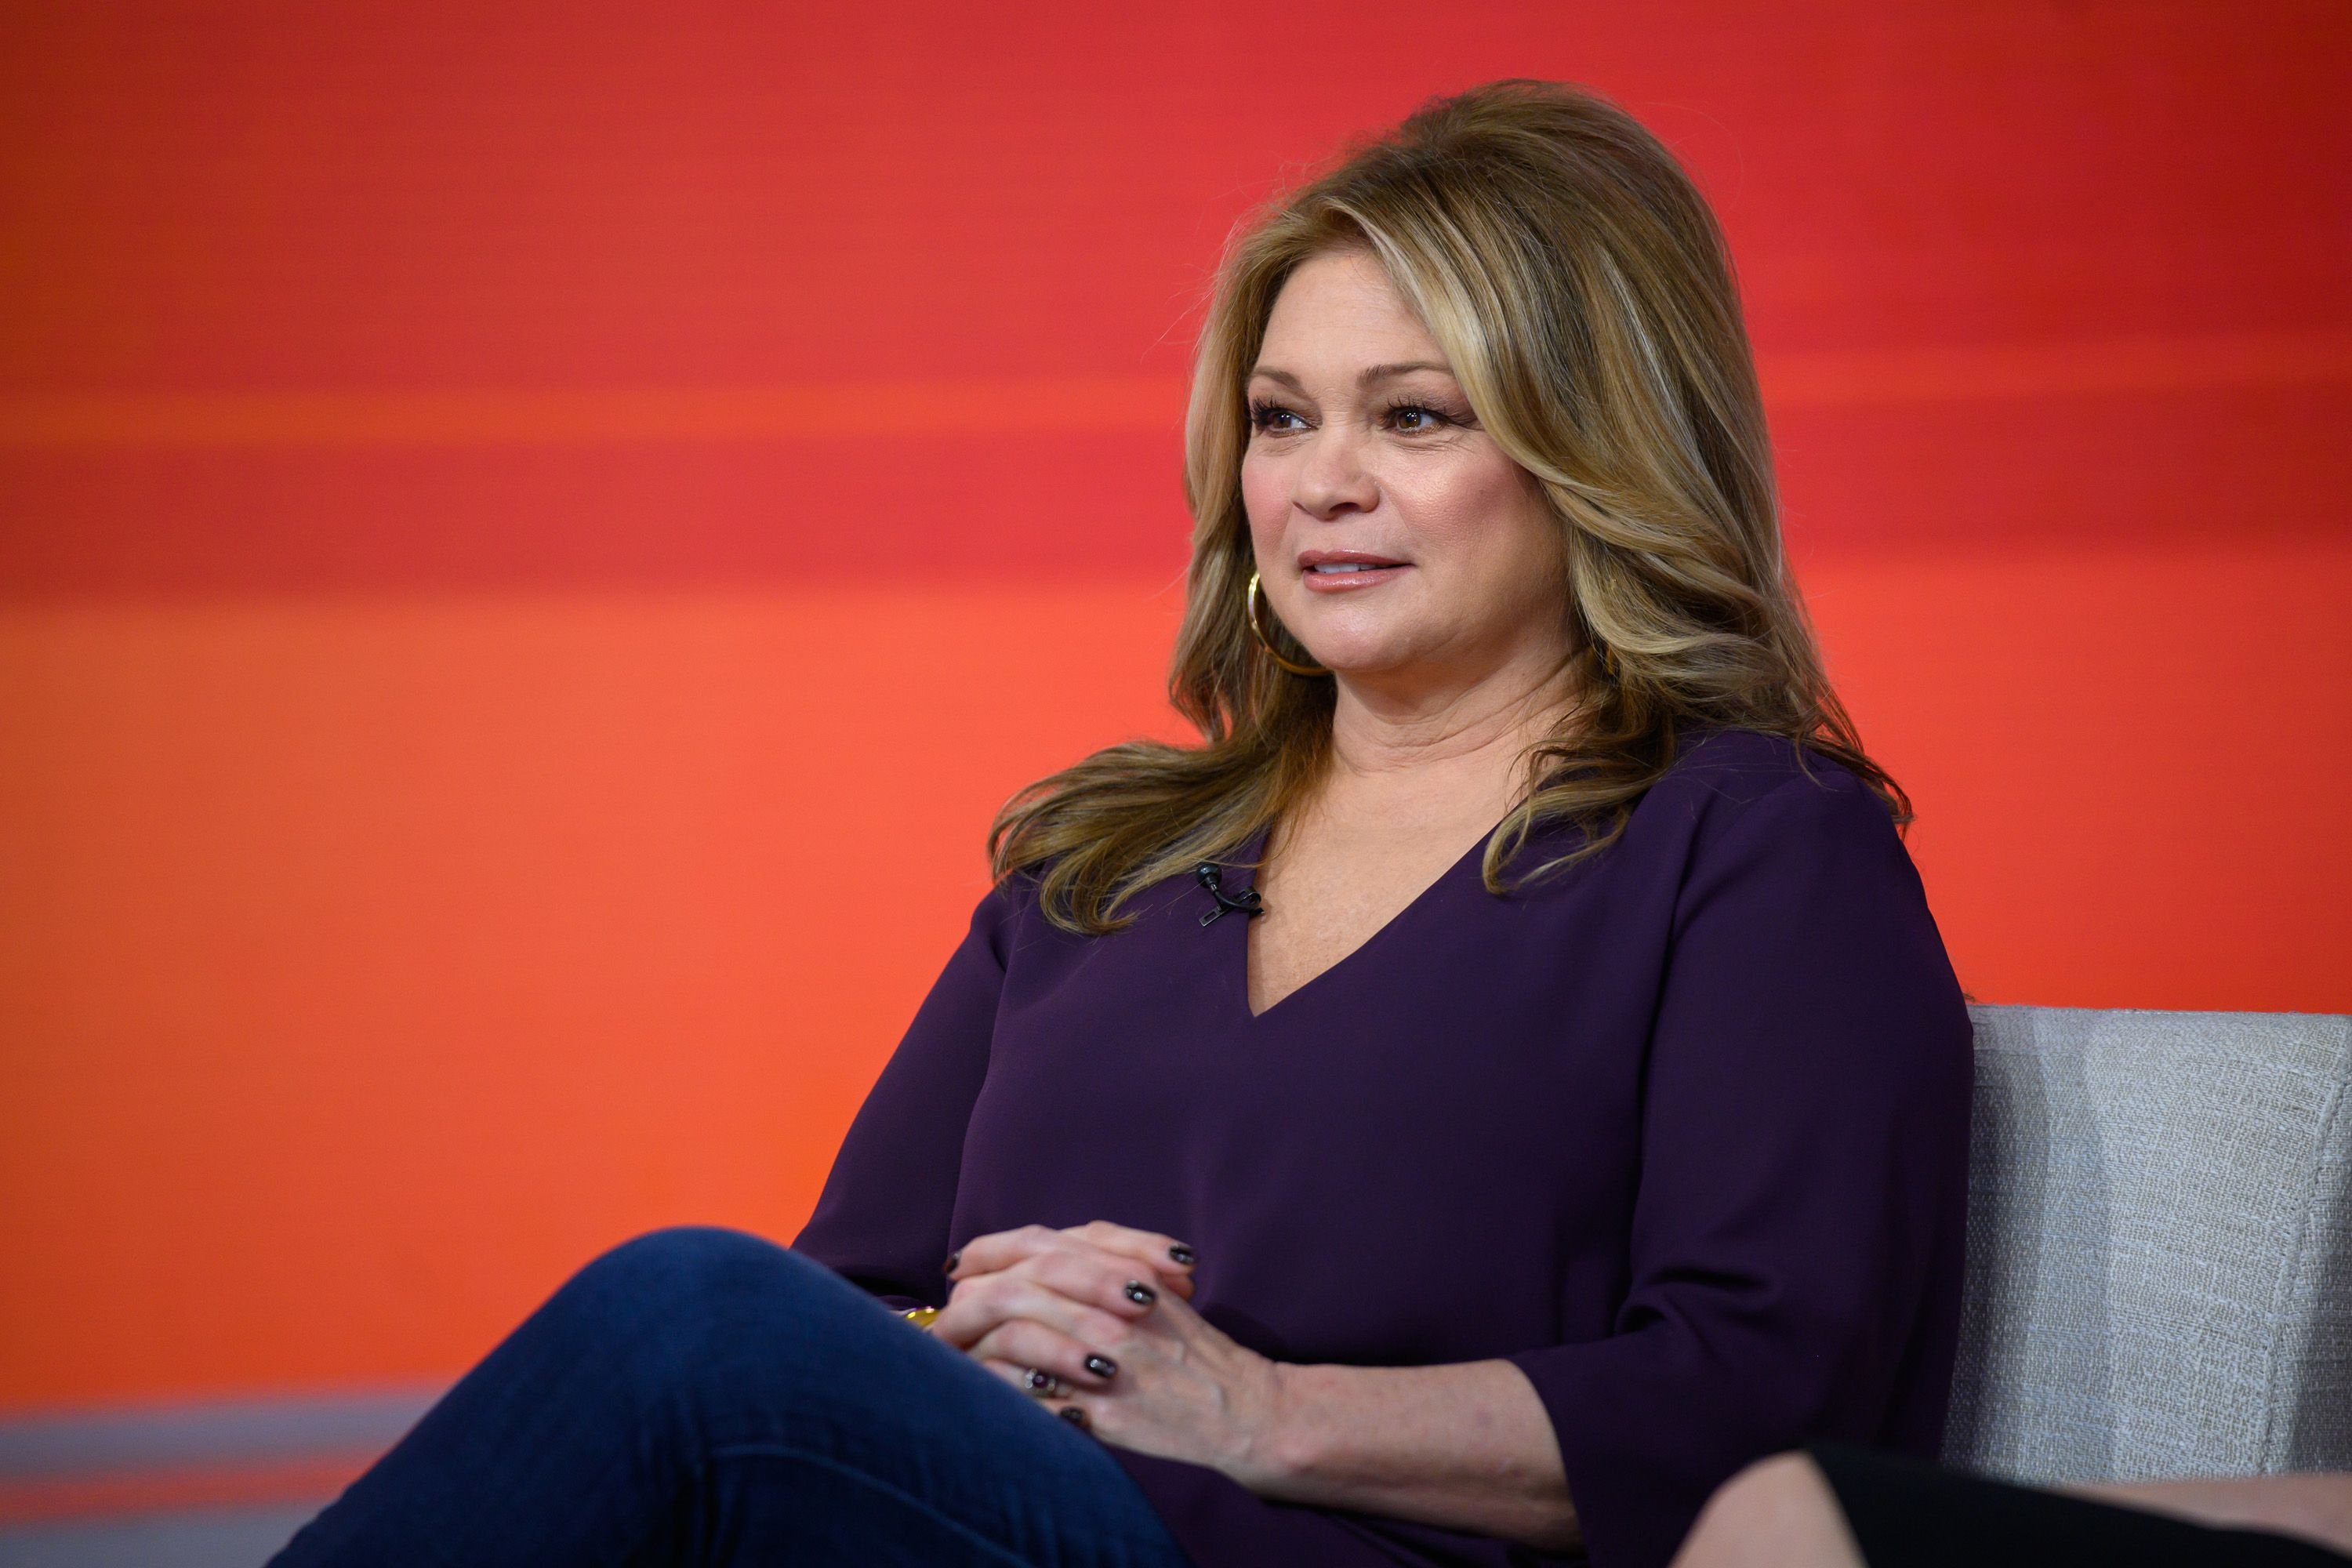 Valerie Bertinelli during "Today" Season 69, January 24, 2020 | Source: Getty Images